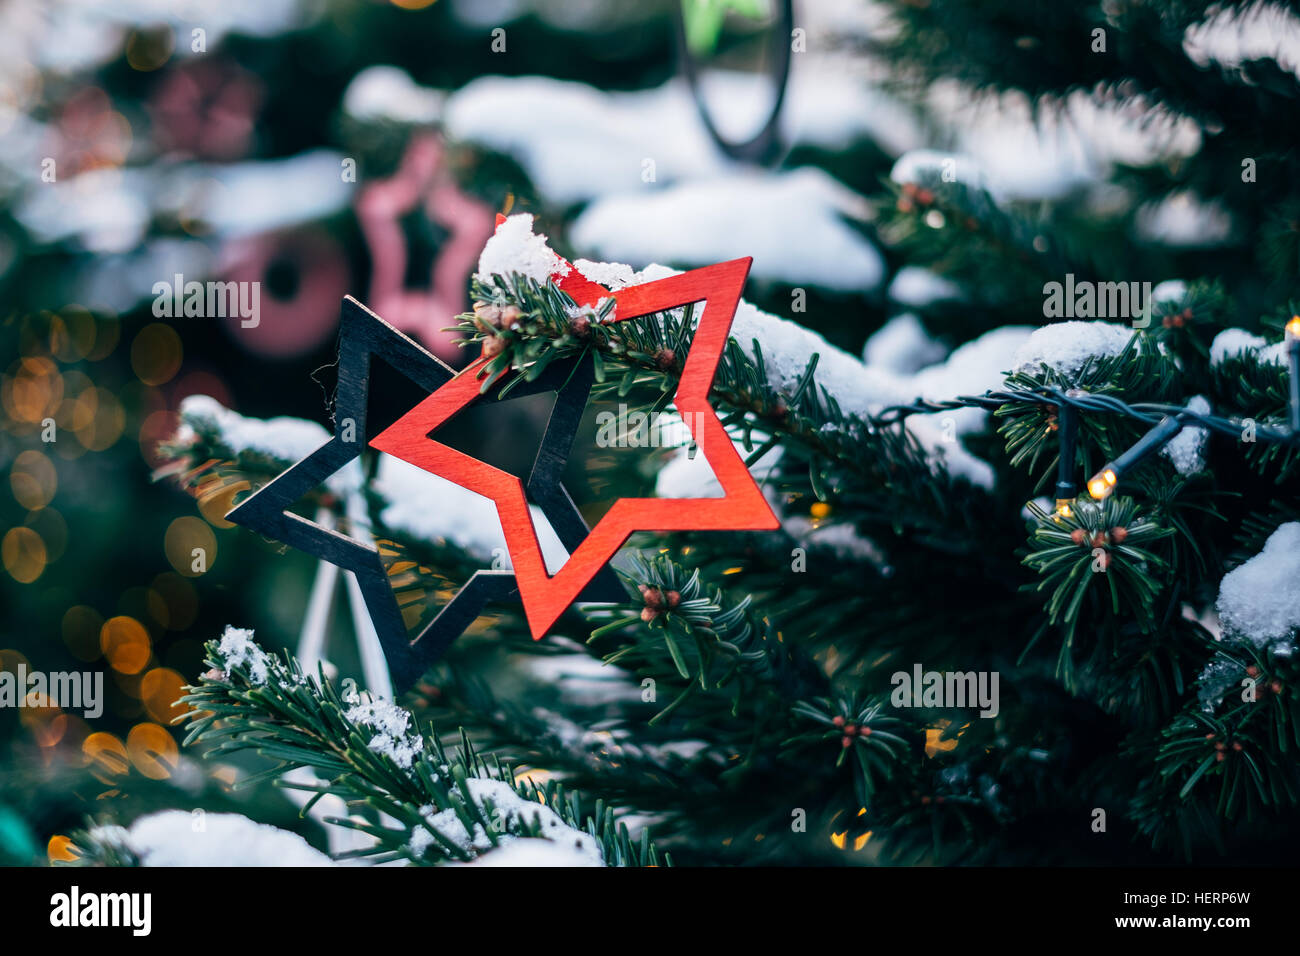 Close-up of a decoration on a Christmas tree Stock Photo